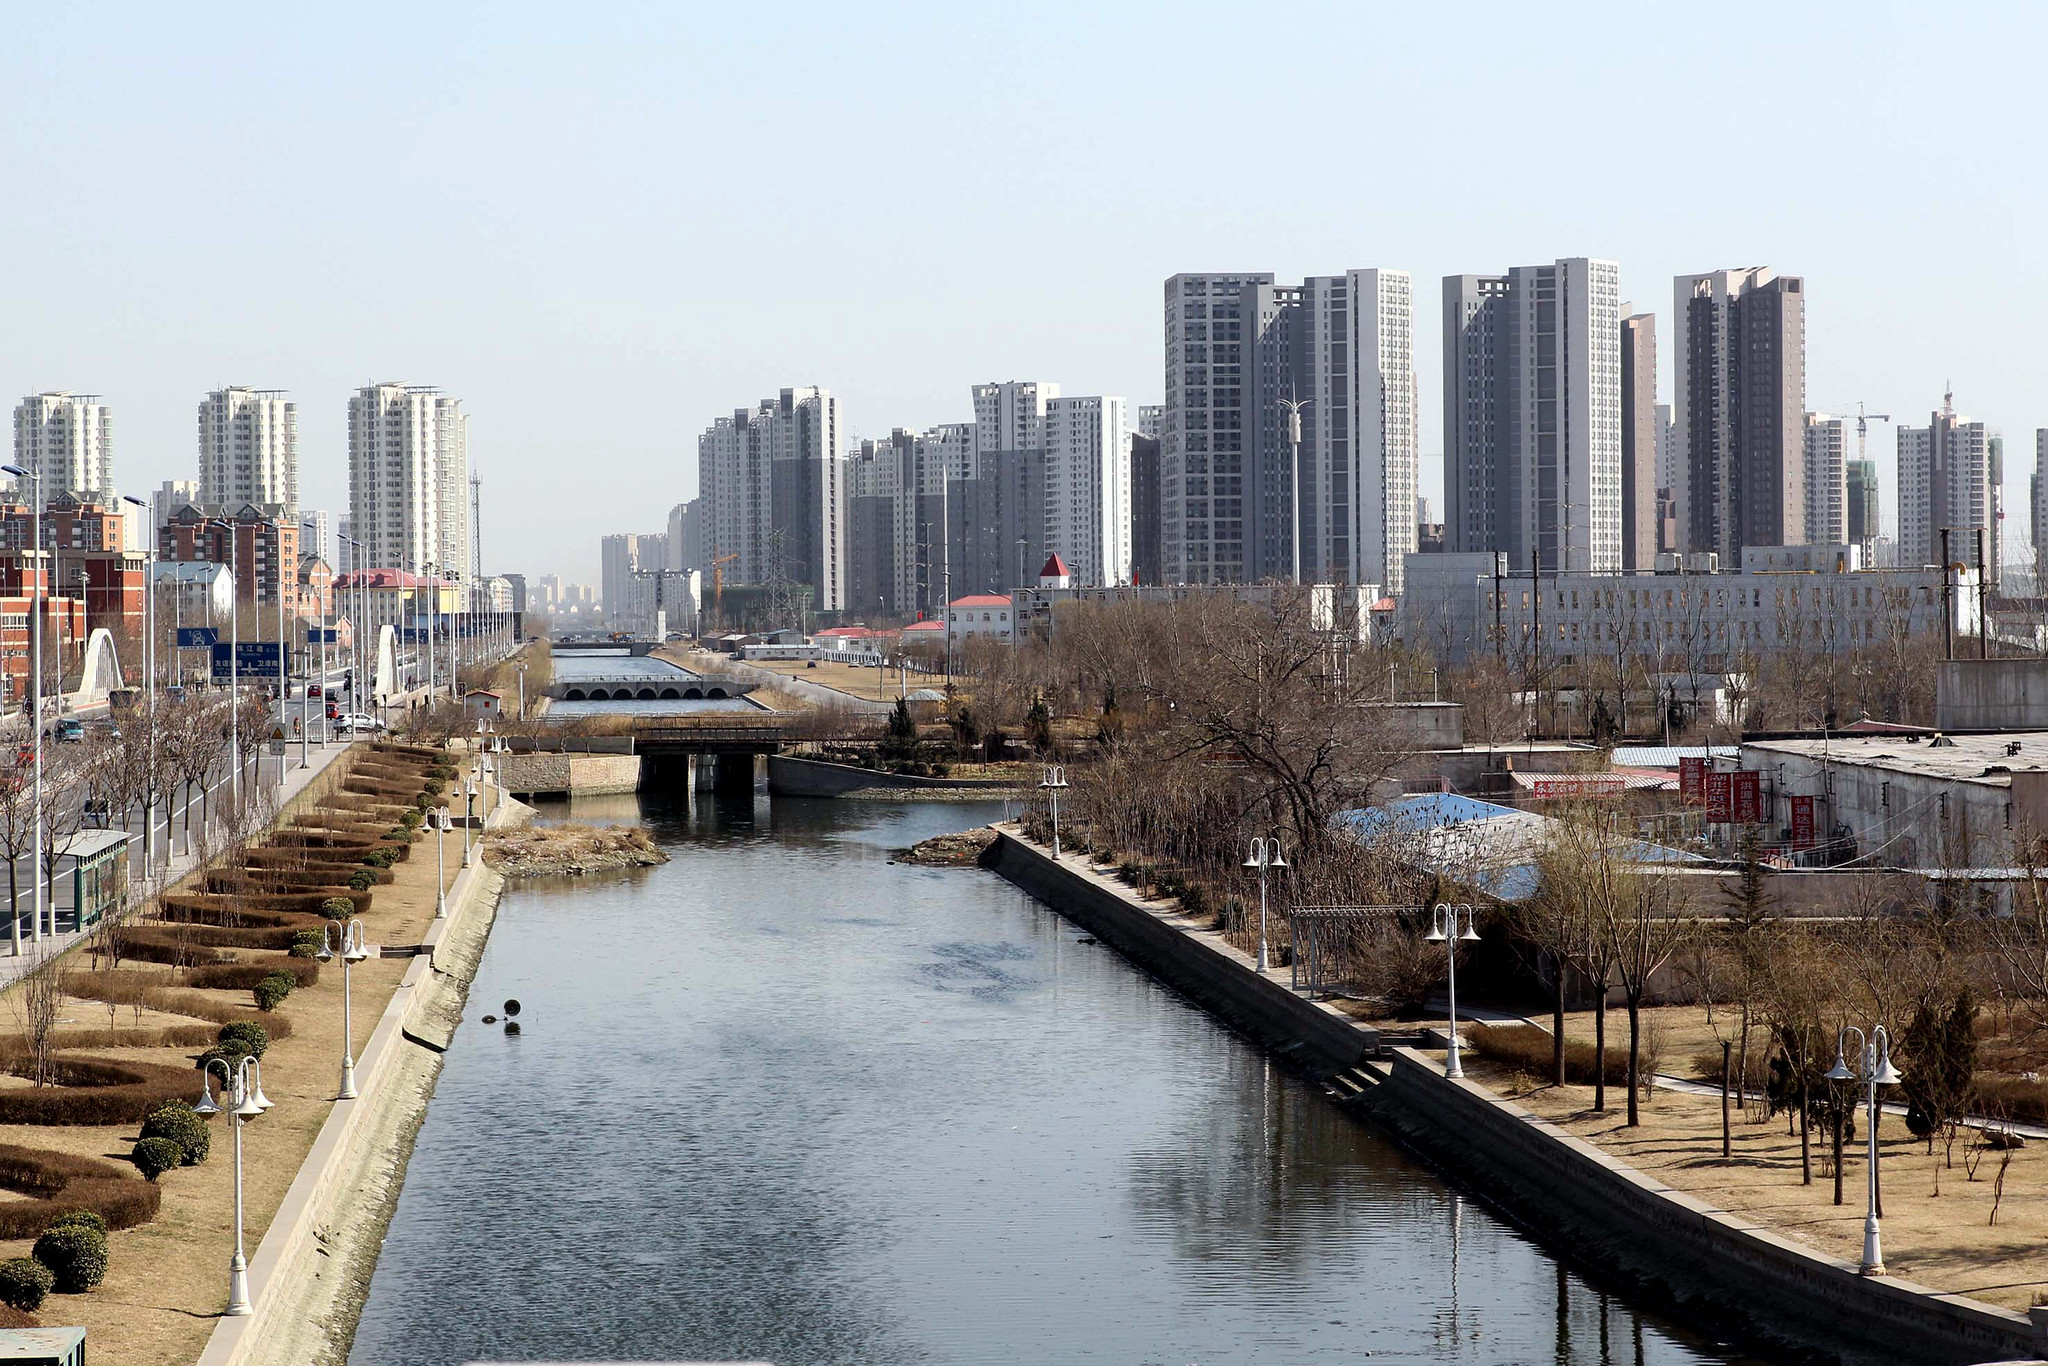 Hai River and high-rise buildings around, Tianjin, China